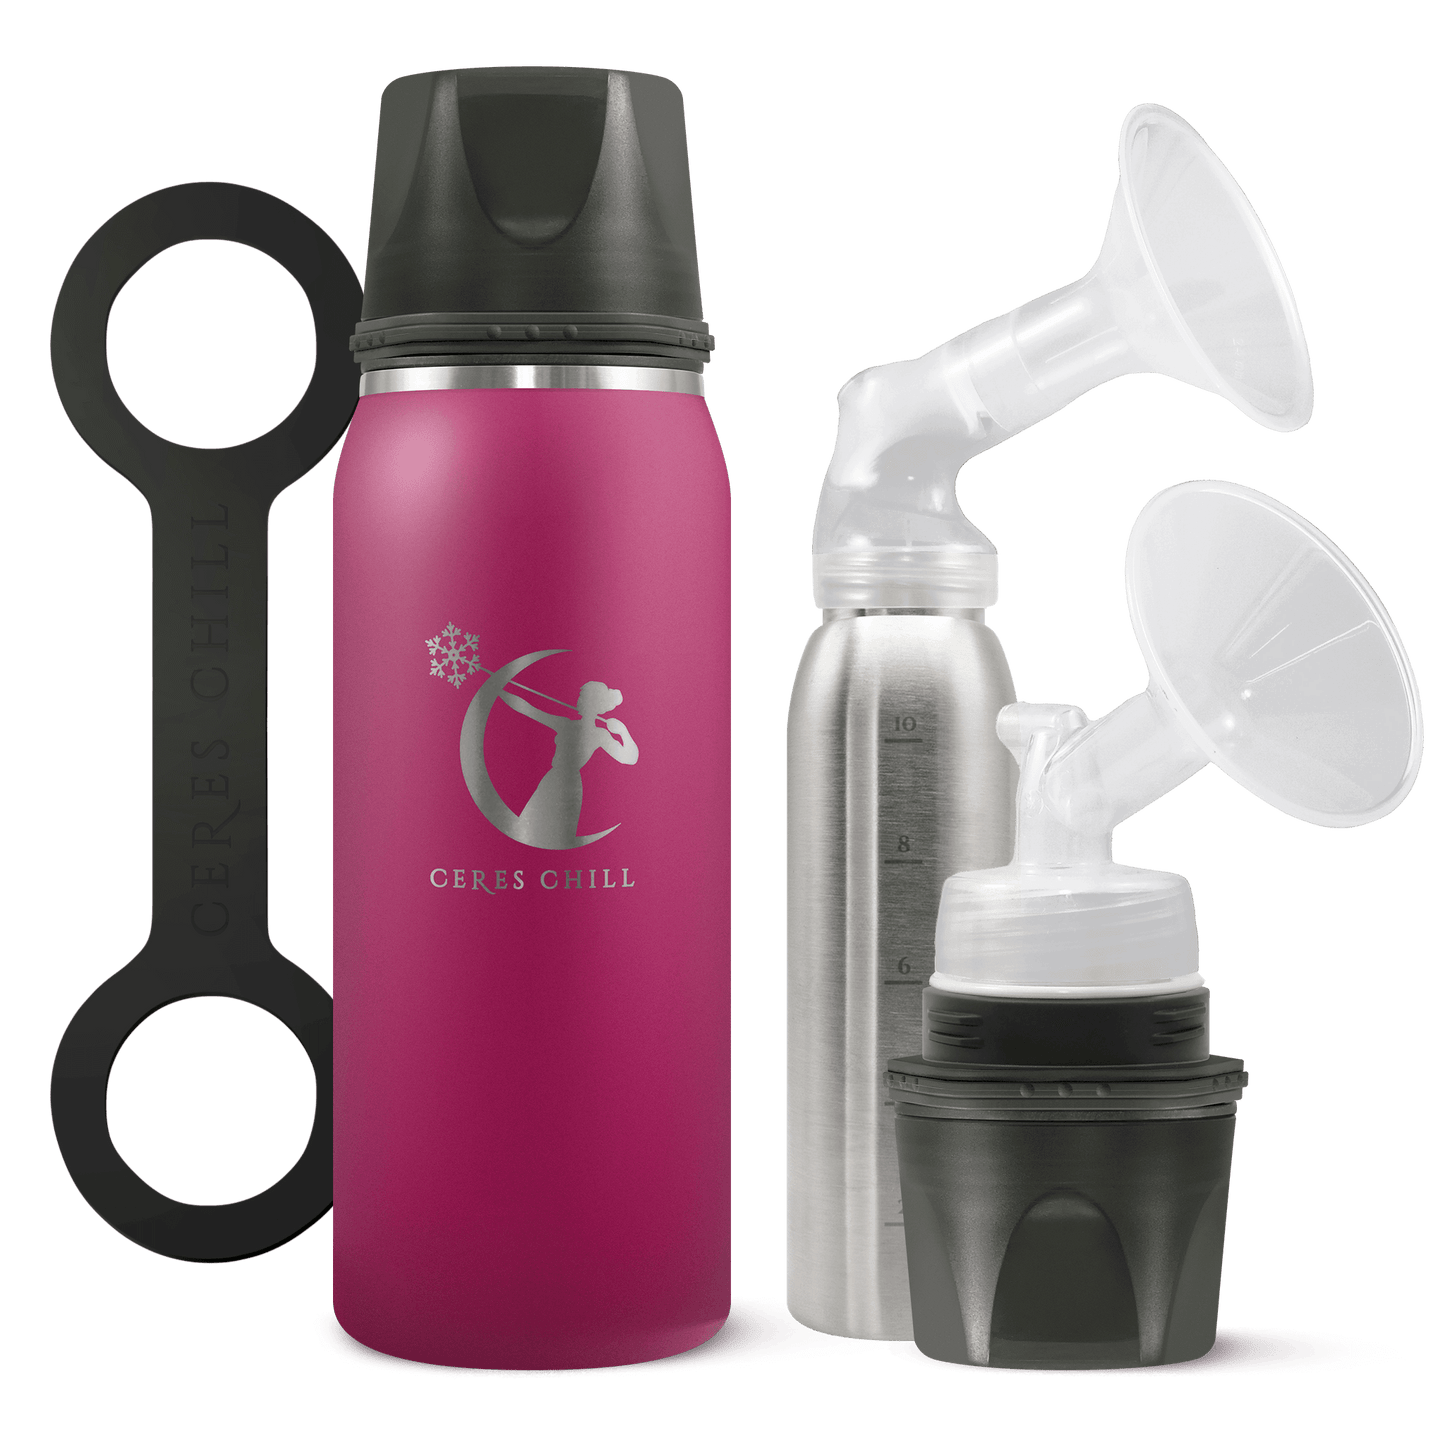 Breastmilk Chiller (Plum) by Ceres Chill